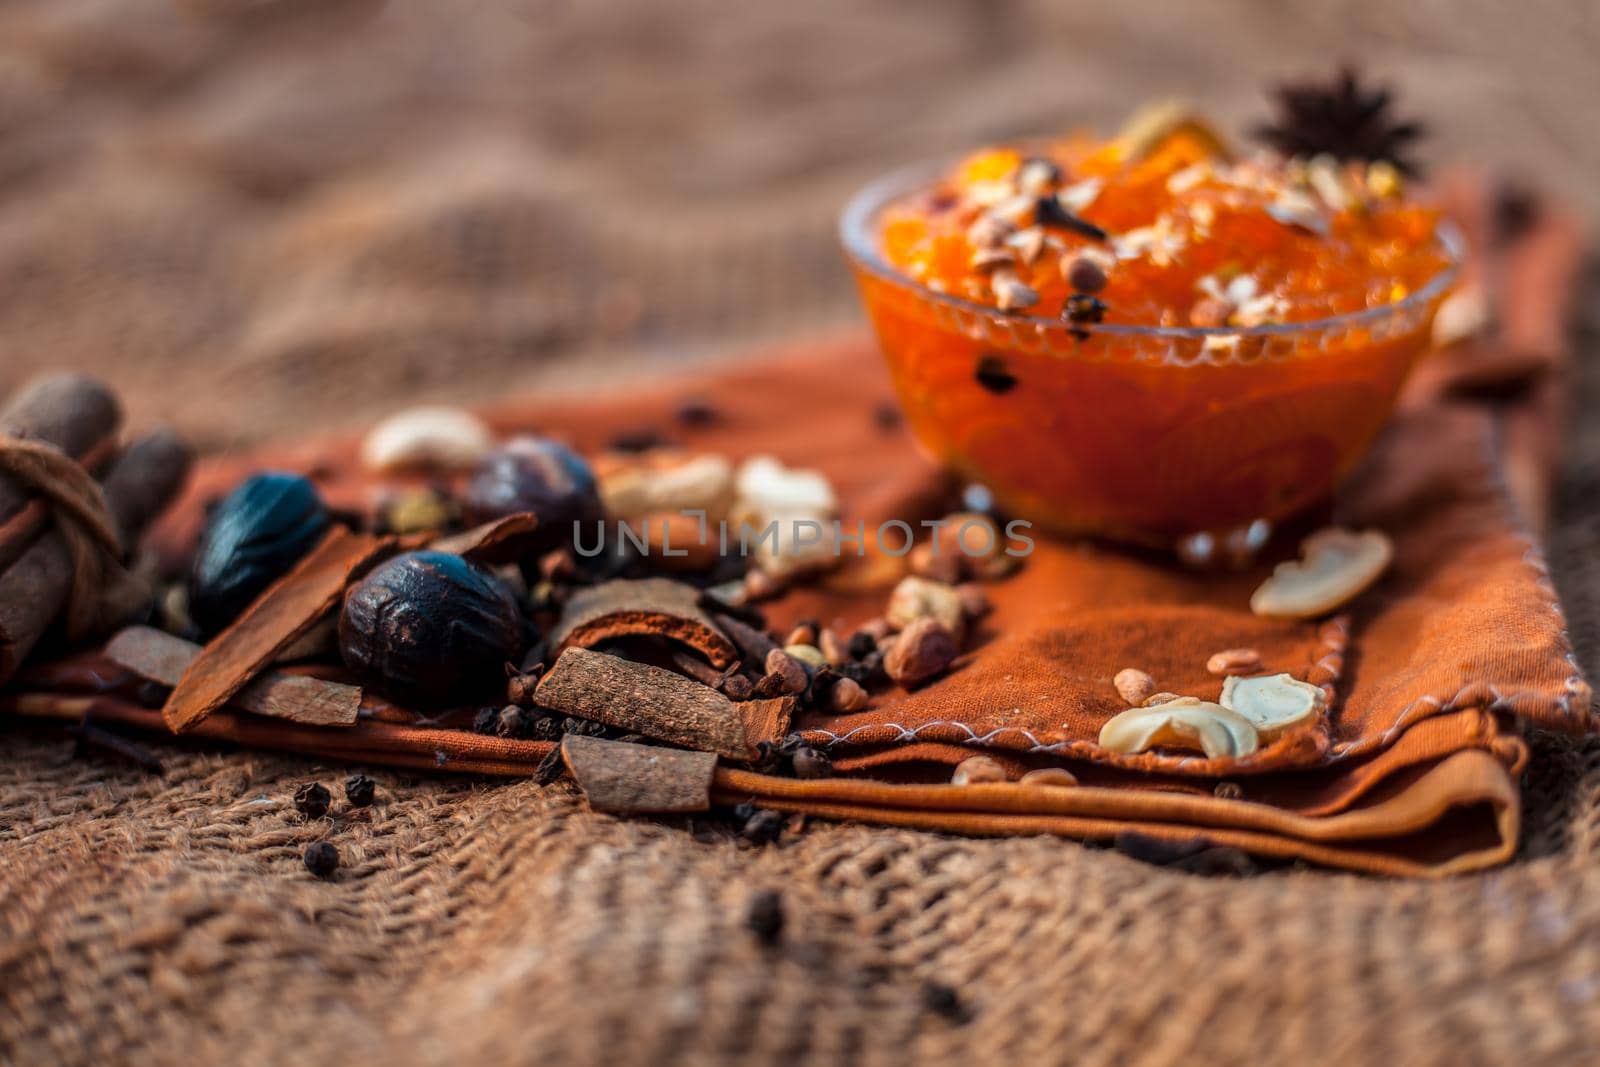 Famous mango preservation i.e. Murba or Murabba in a glass bowl on jute bags surface along with dry fruits and spices with it.Horizontal shot with background blurred. by mirzamlk